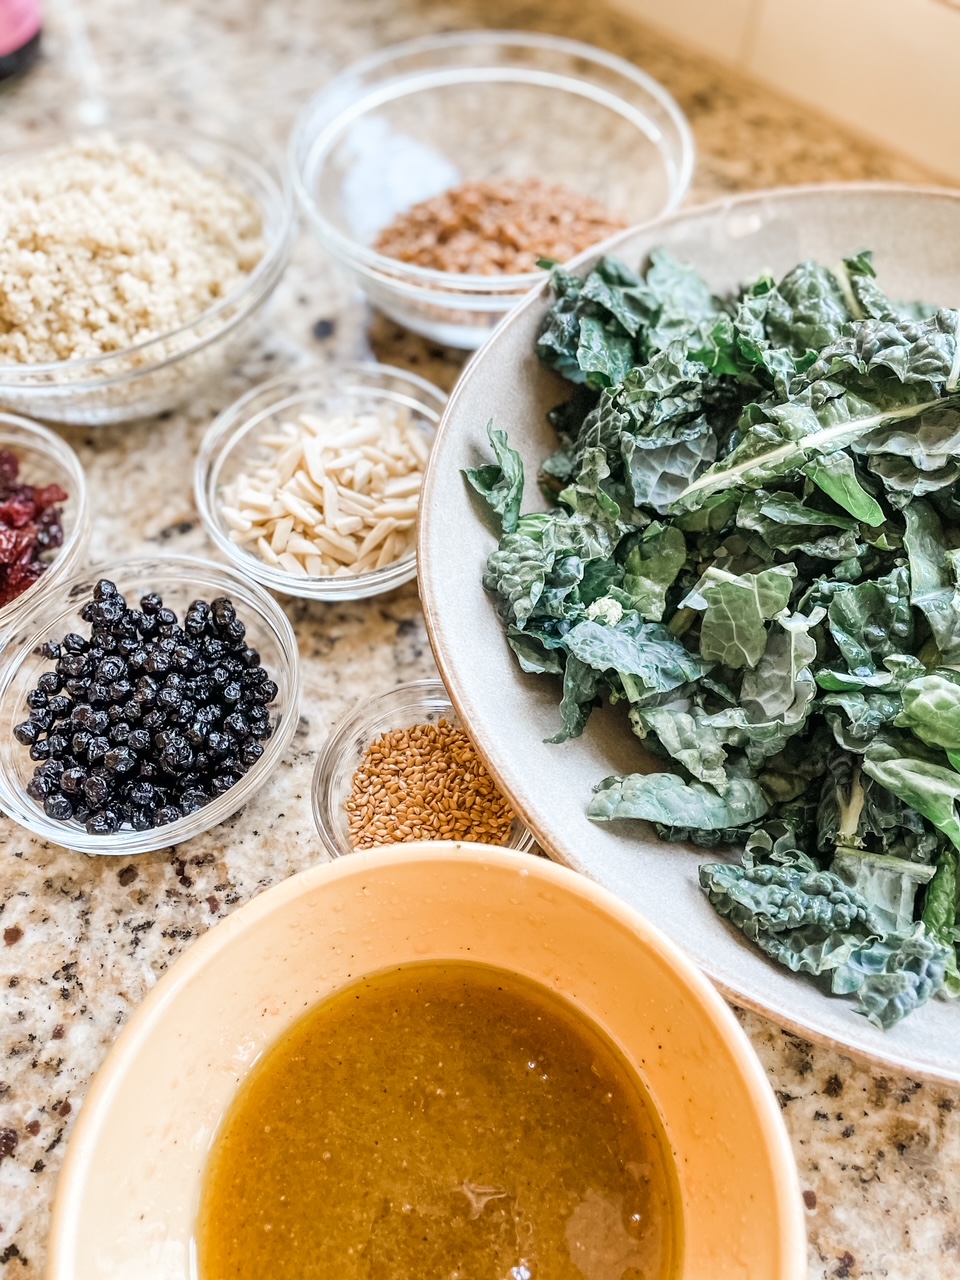 The ingredients for the Kale Superfood Salad Recipe laid out in individual bowls.